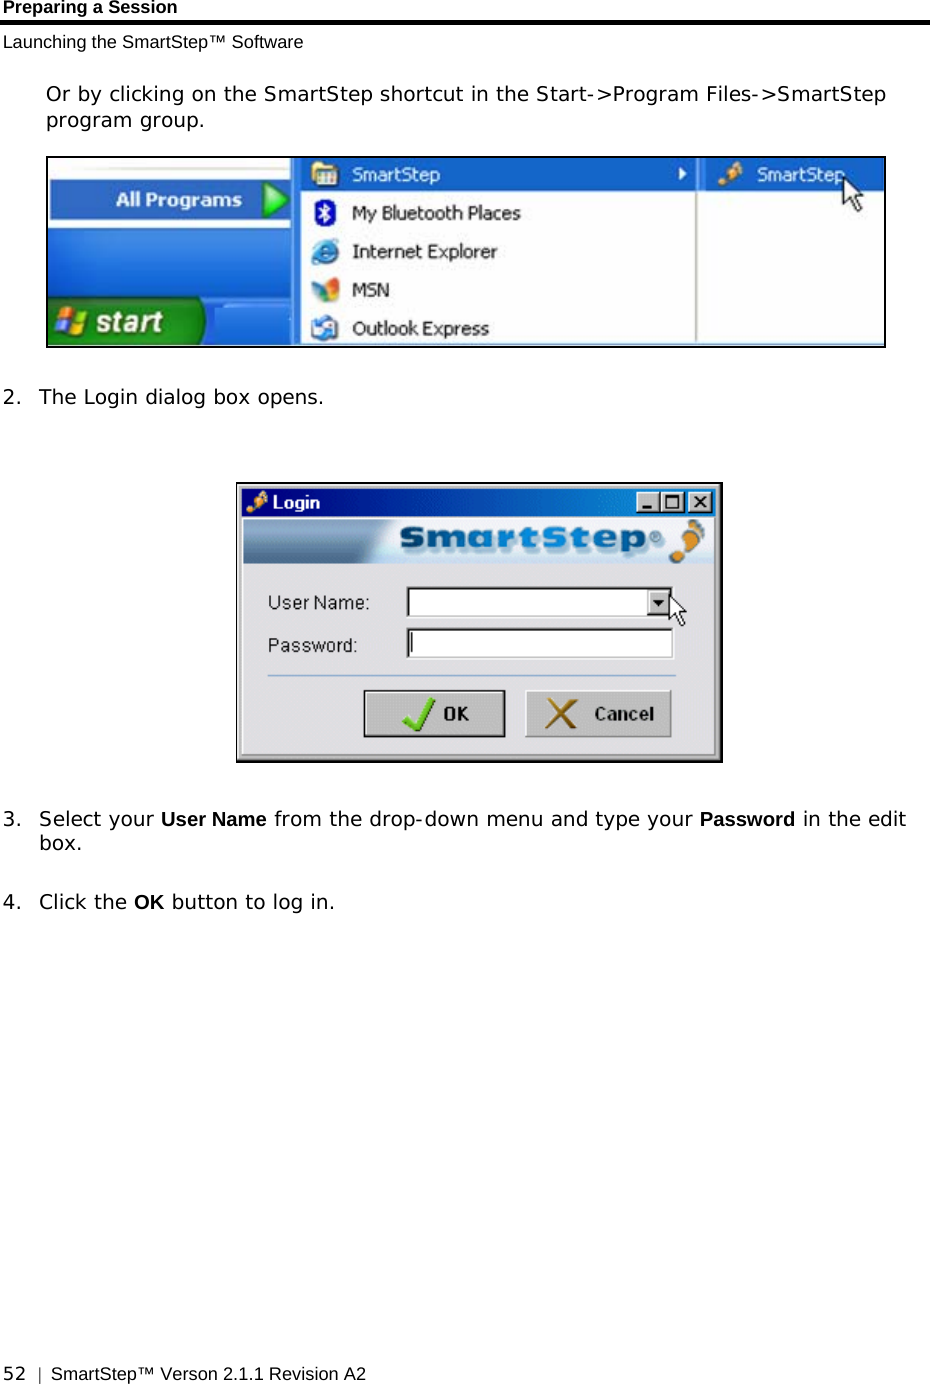 Preparing a Session Launching the SmartStep™ Software  52  |  SmartStep™ Verson 2.1.1 Revision A2   Or by clicking on the SmartStep shortcut in the Start-&gt;Program Files-&gt;SmartStep program group.   2. The Login dialog box opens.     3. Select your User Name from the drop-down menu and type your Password in the edit box.    4. Click the OK button to log in. 